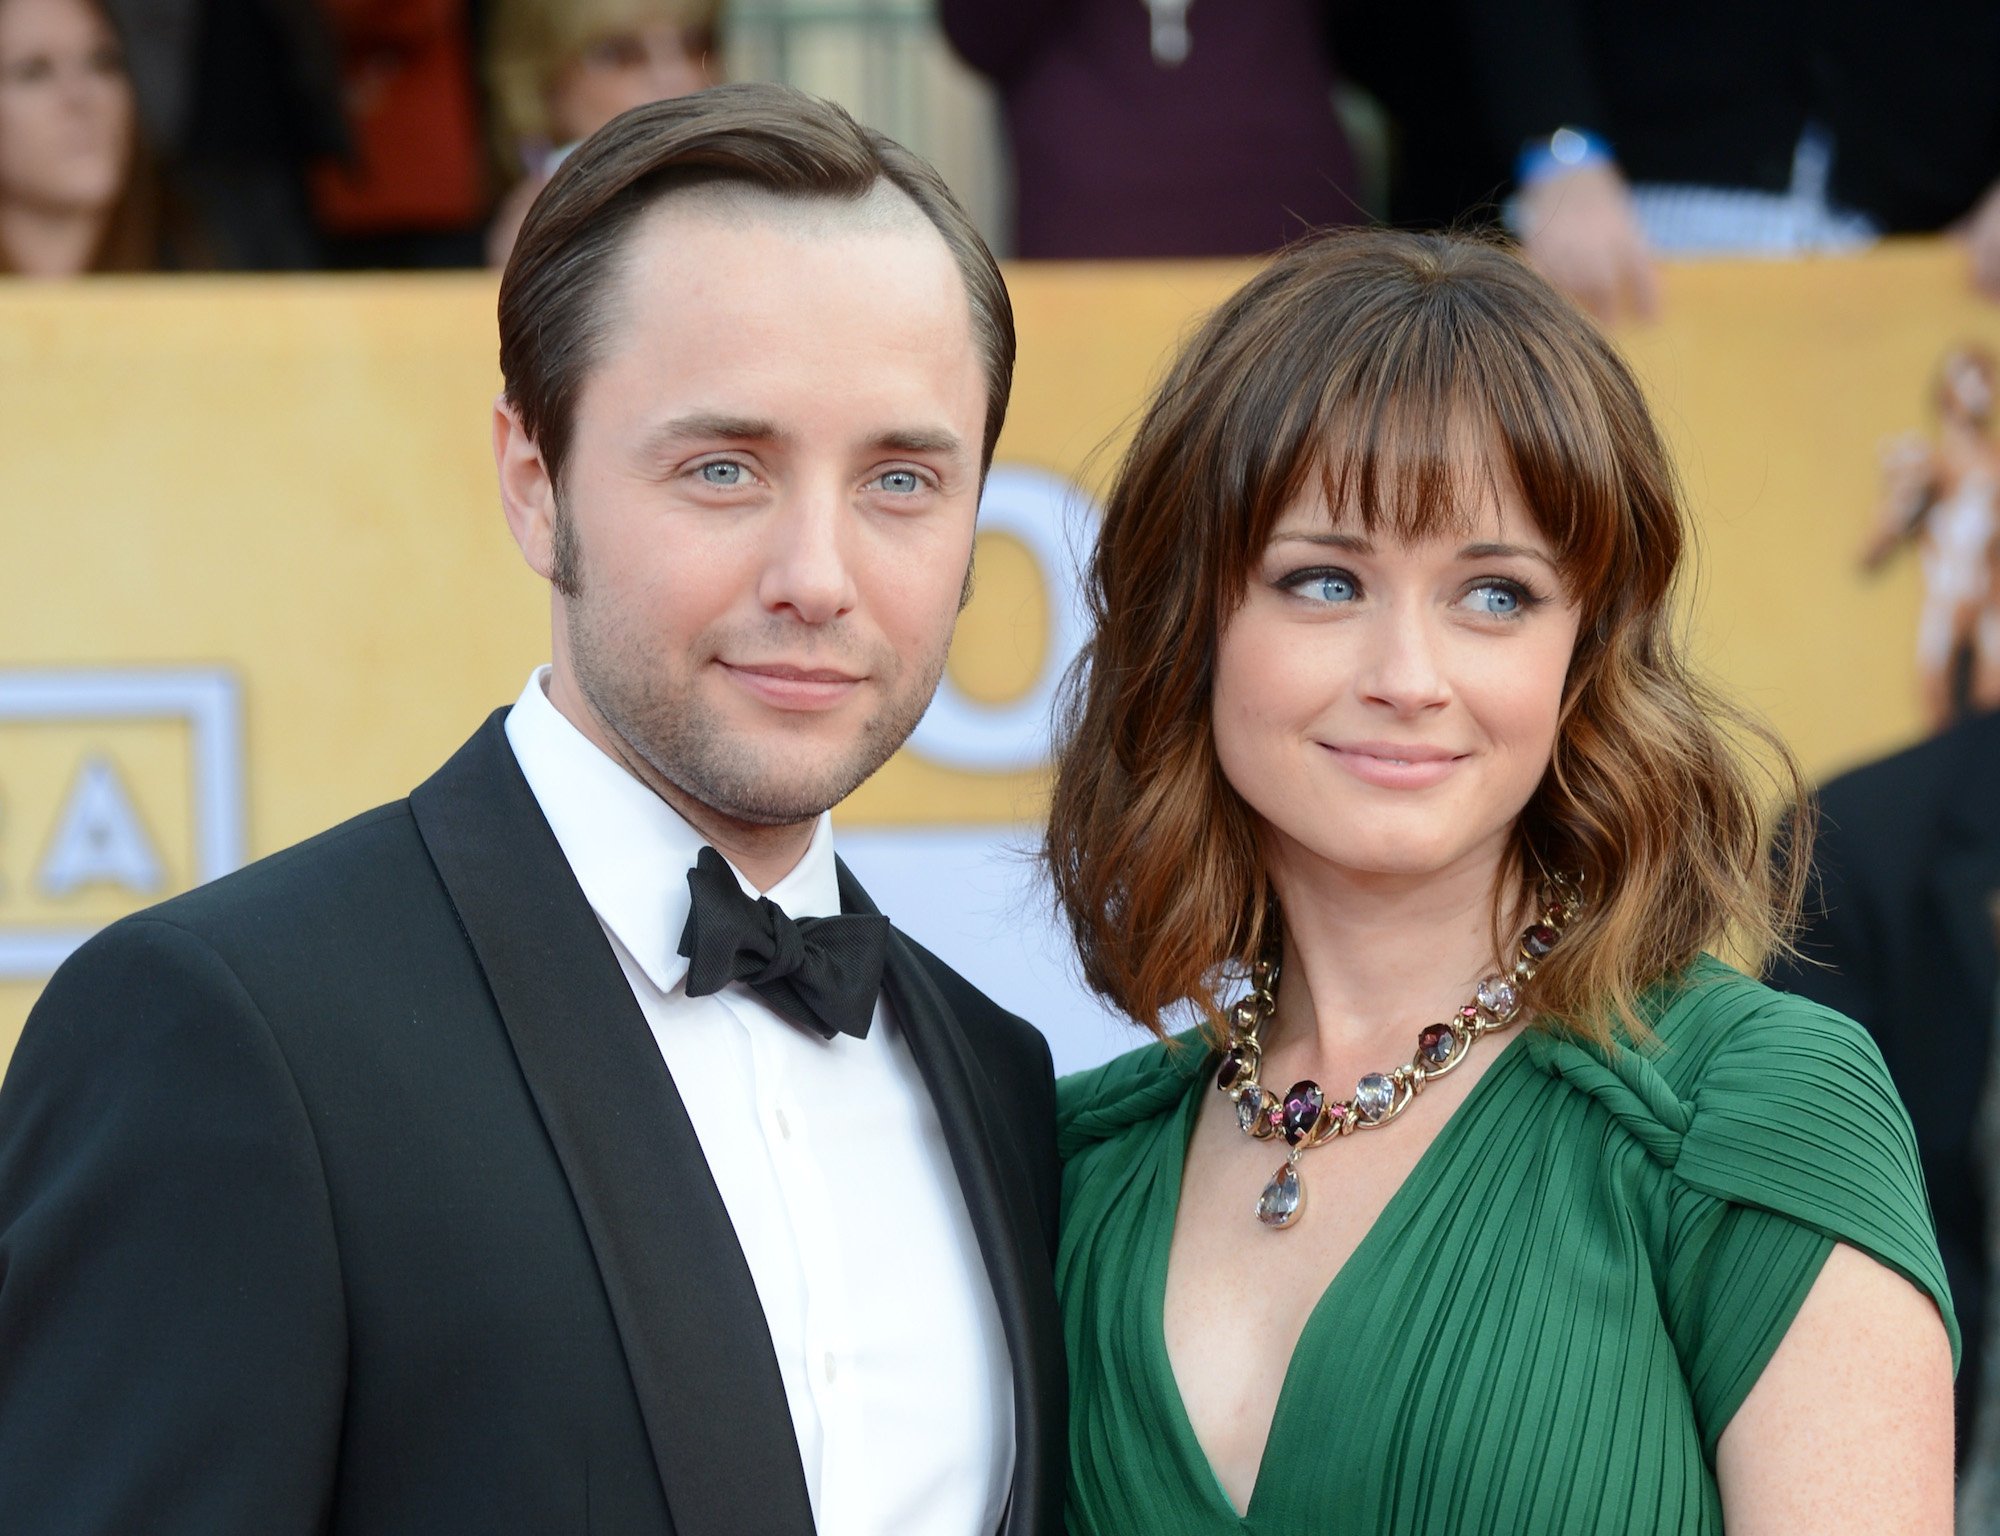 (L-R) Vincent Kartheiser and Alexis Bledel smiling in front of a blurred crowd